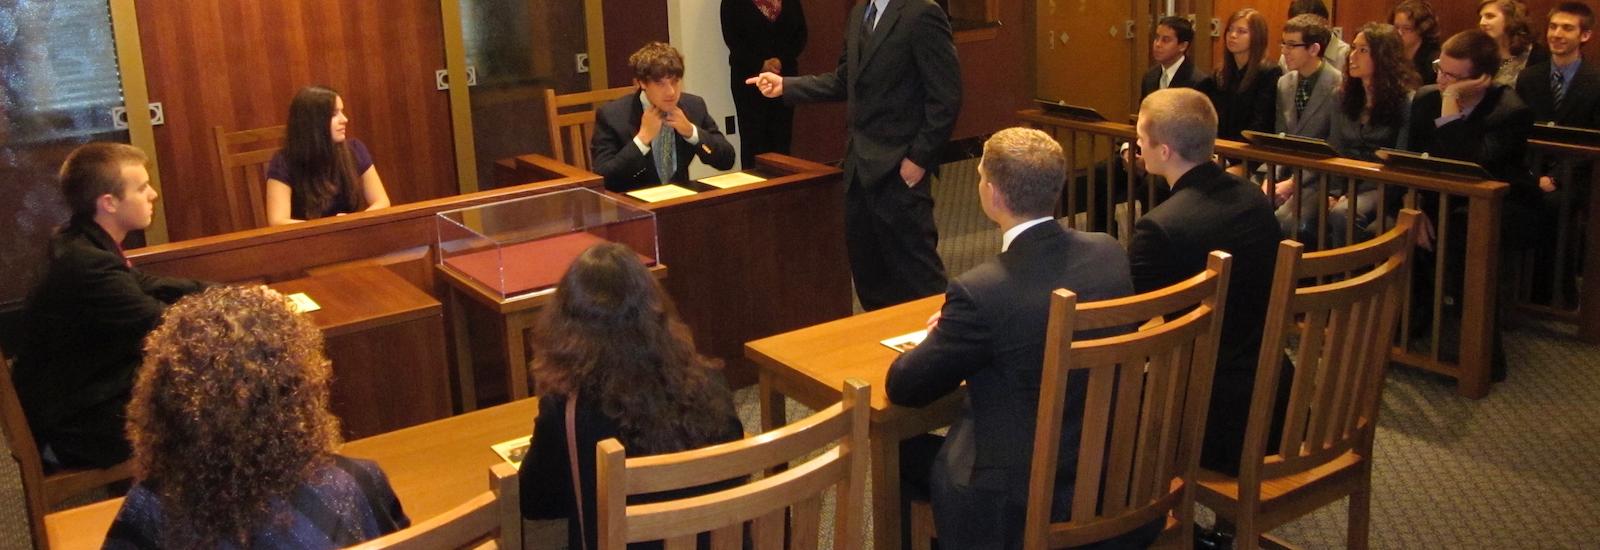 Students in mock courtroom setting